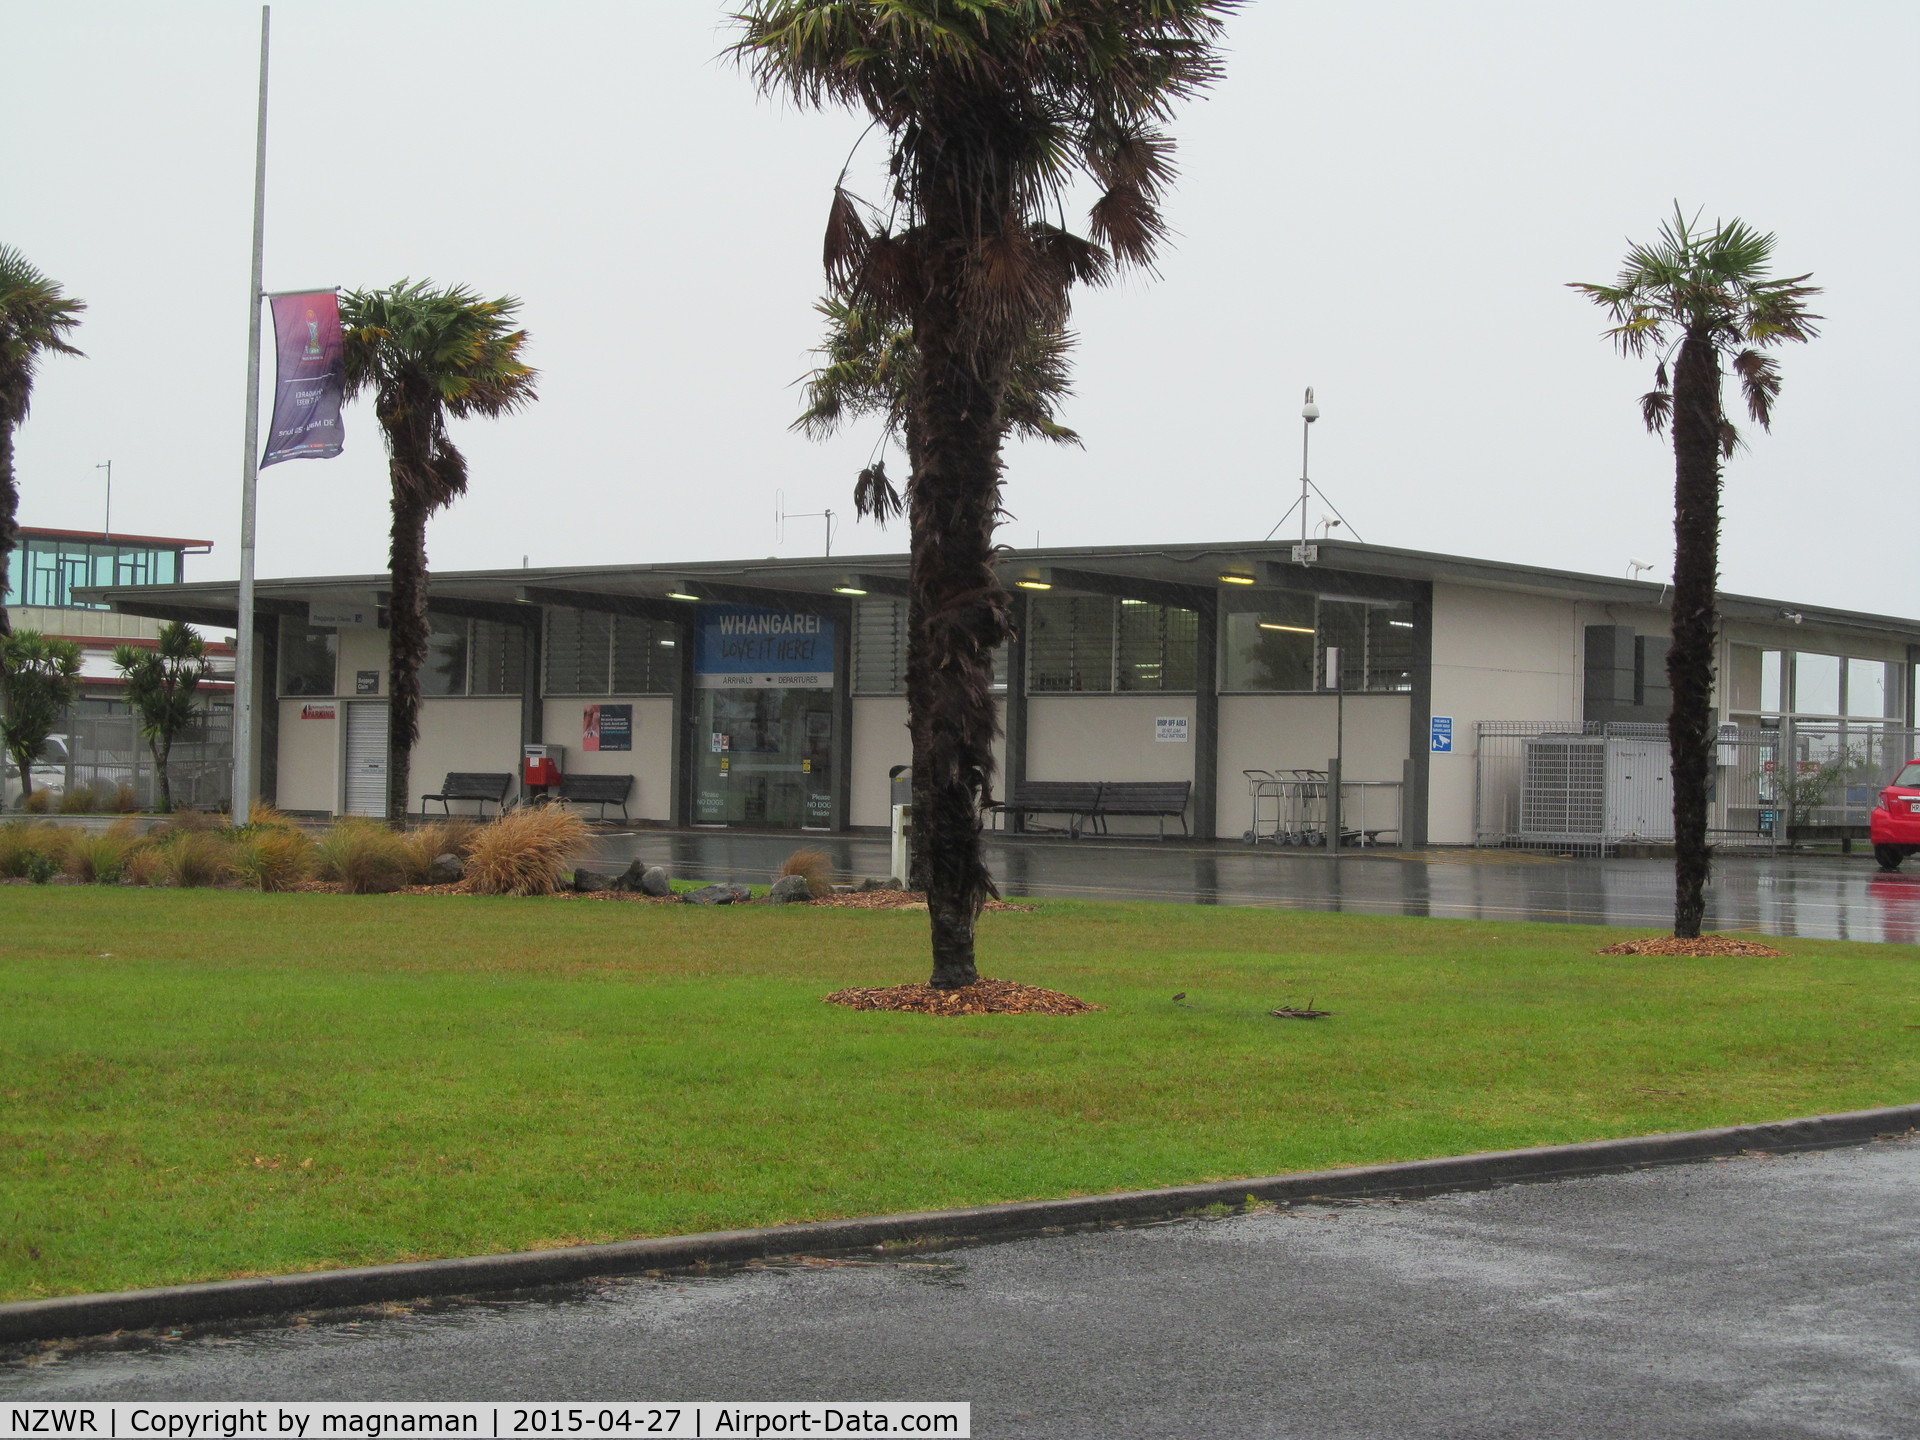 Whangarei Airport, Whangarei New Zealand (NZWR) - Terminal on a wet and blustery day